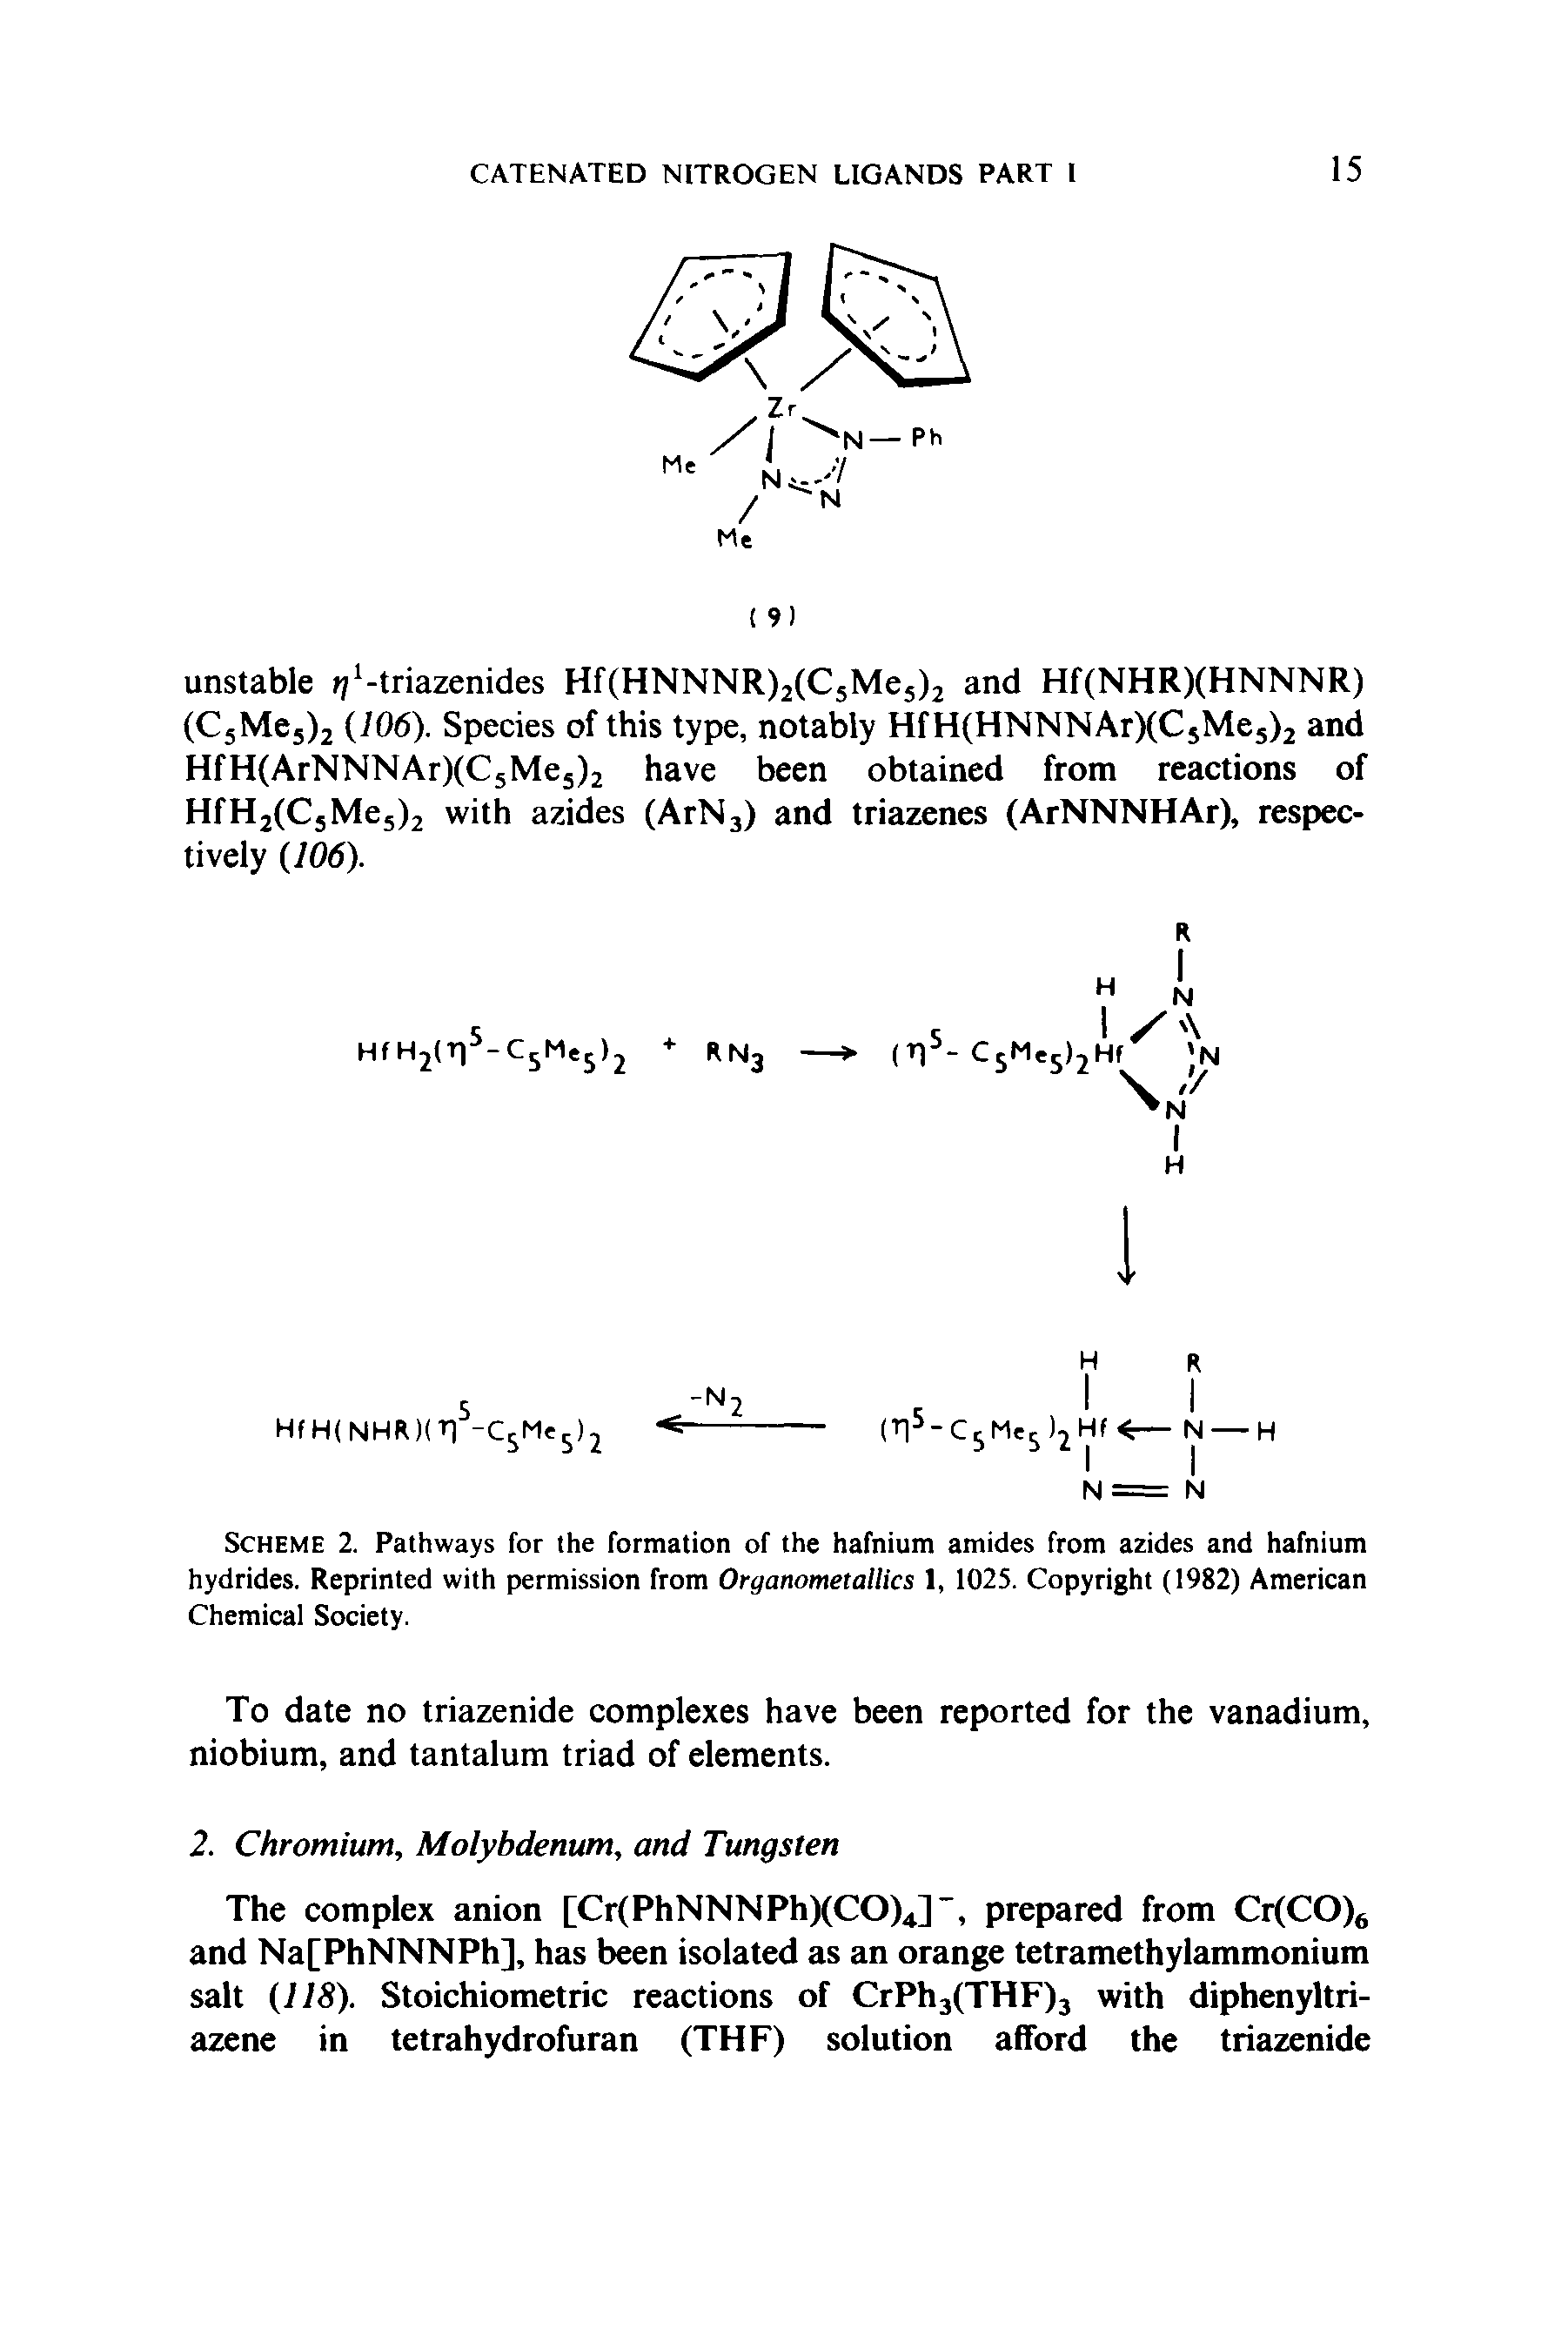 Scheme 2. Pathways for the formation of the hafnium amides from azides and hafnium hydrides. Reprinted with permission from Organometallics 1, 1025. Copyright (1982) American Chemical Society.